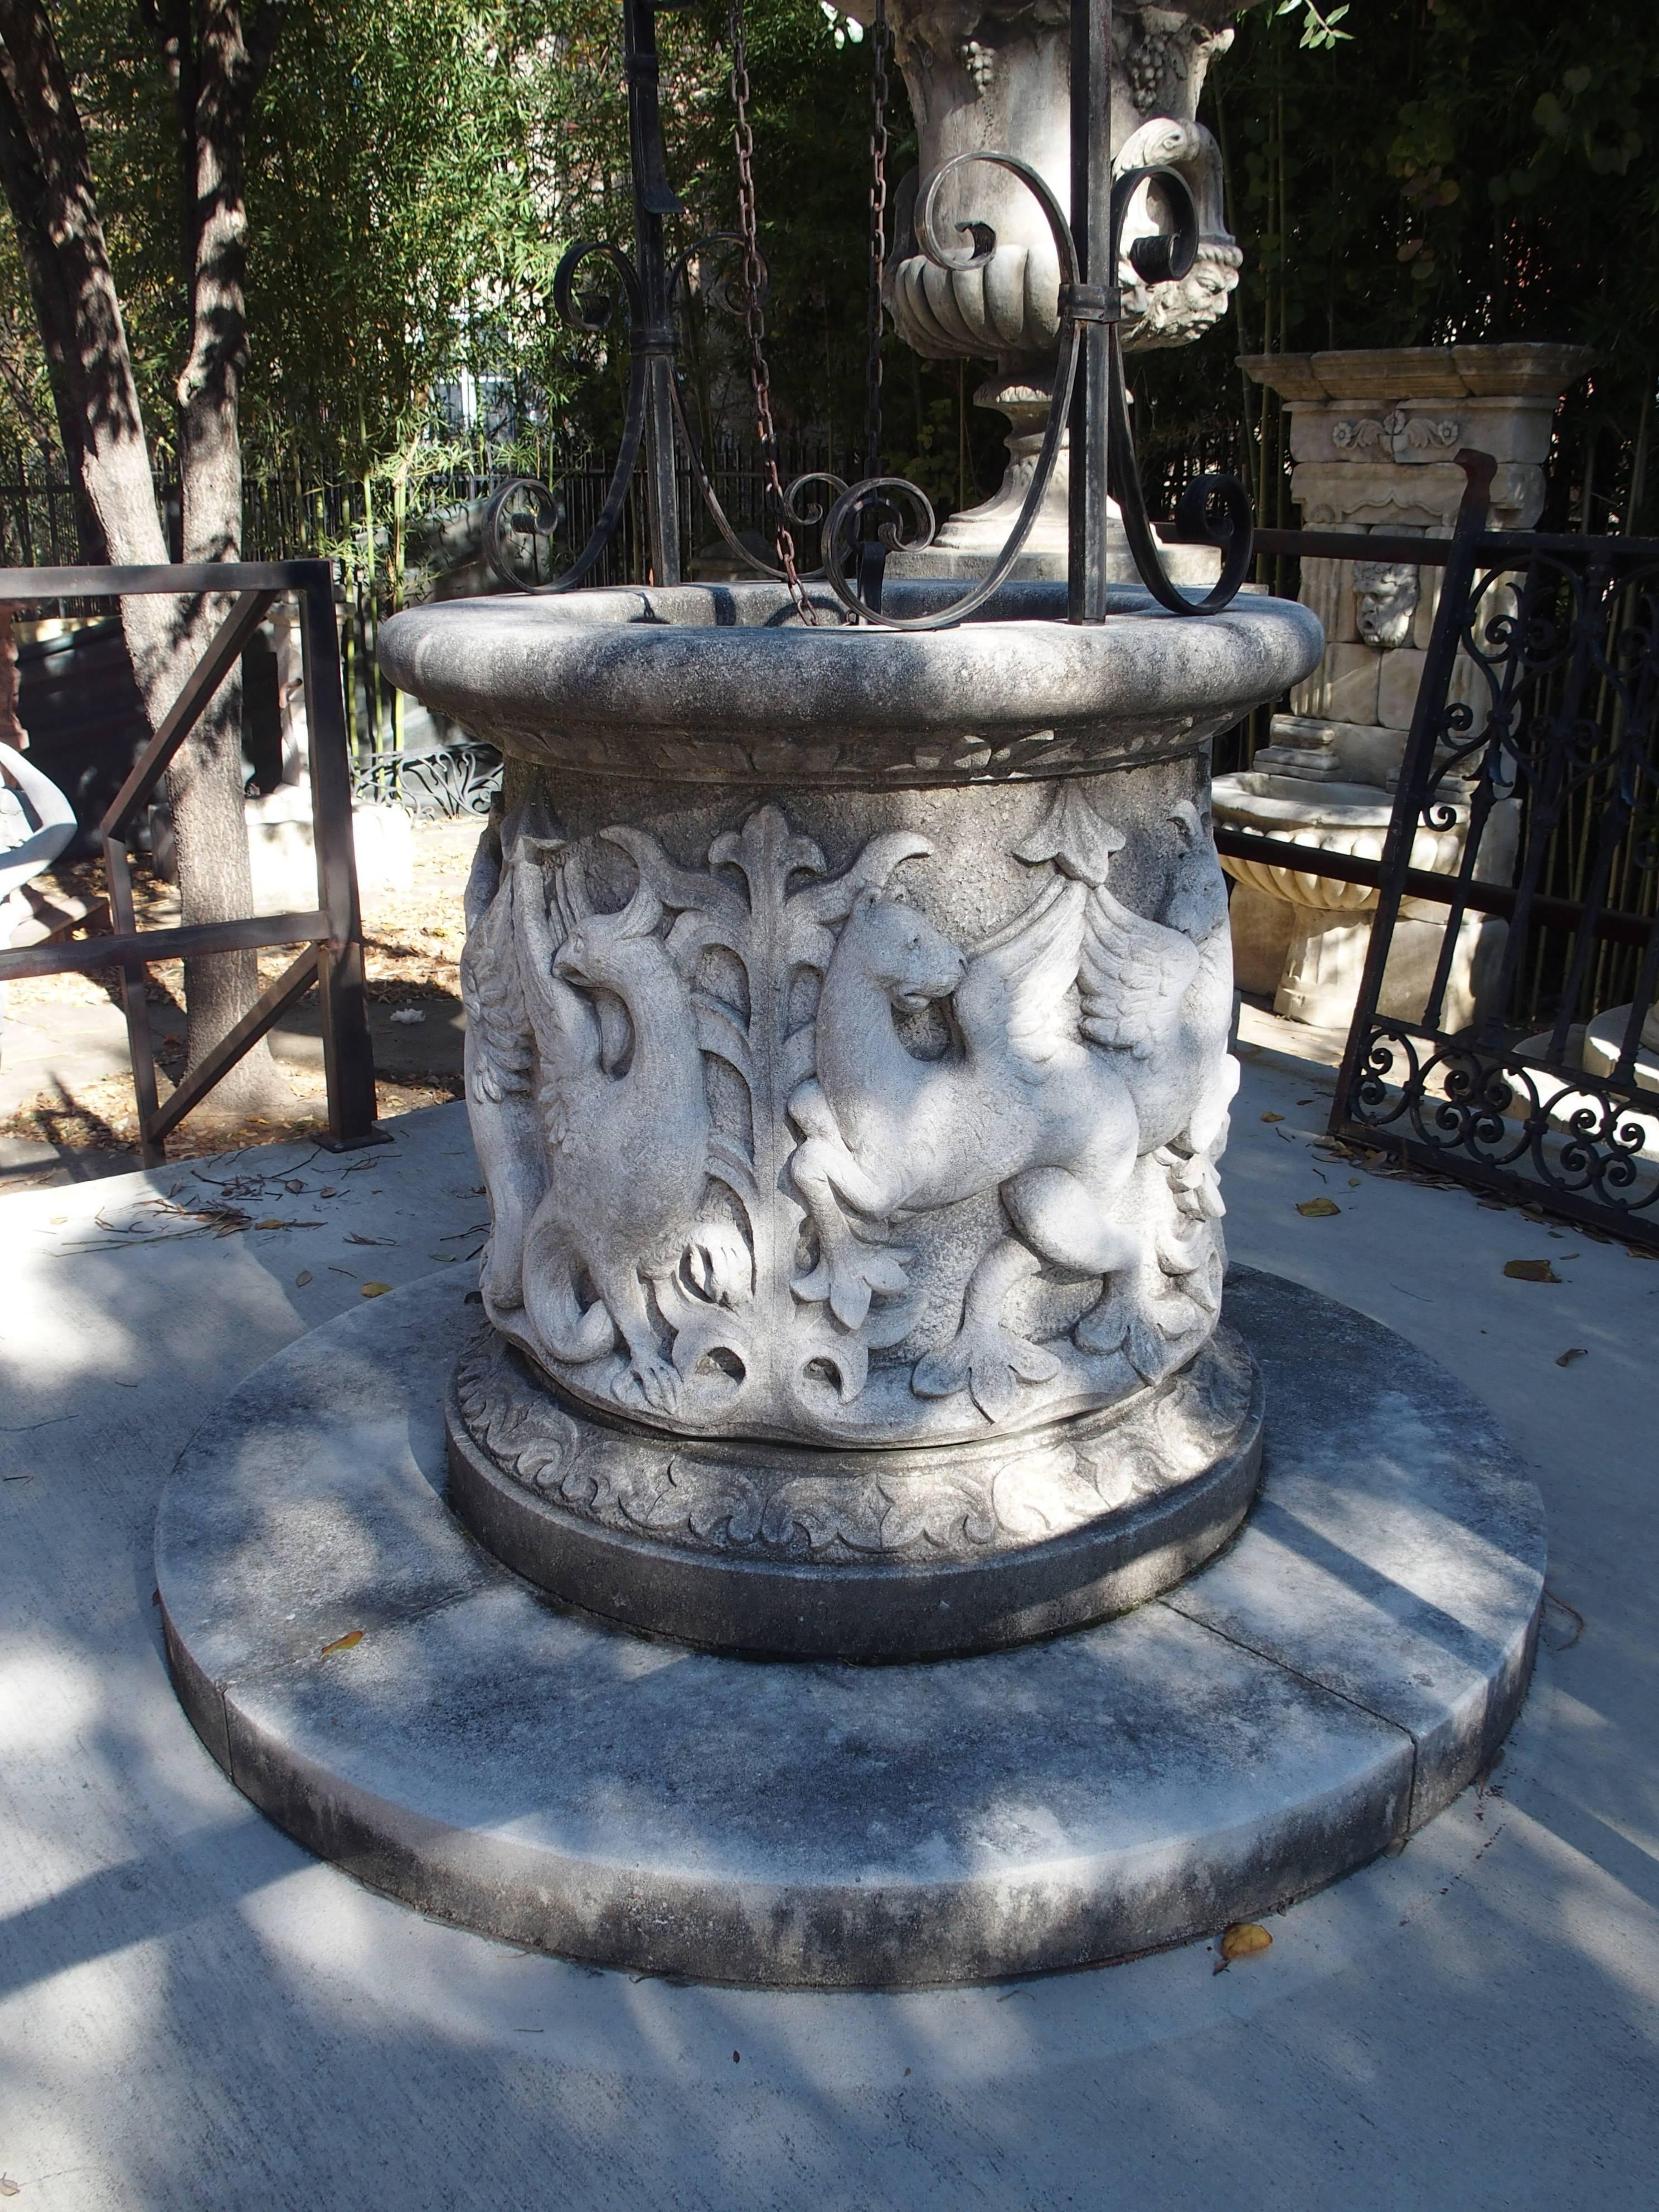 This beautiful well is made of a tight grained limestone from Northeastern Italy. The entire wellhead has been cut from one single block of stone by master Italian stone artisans. It has wonderful deep carves featuring griffins, fantastical sea